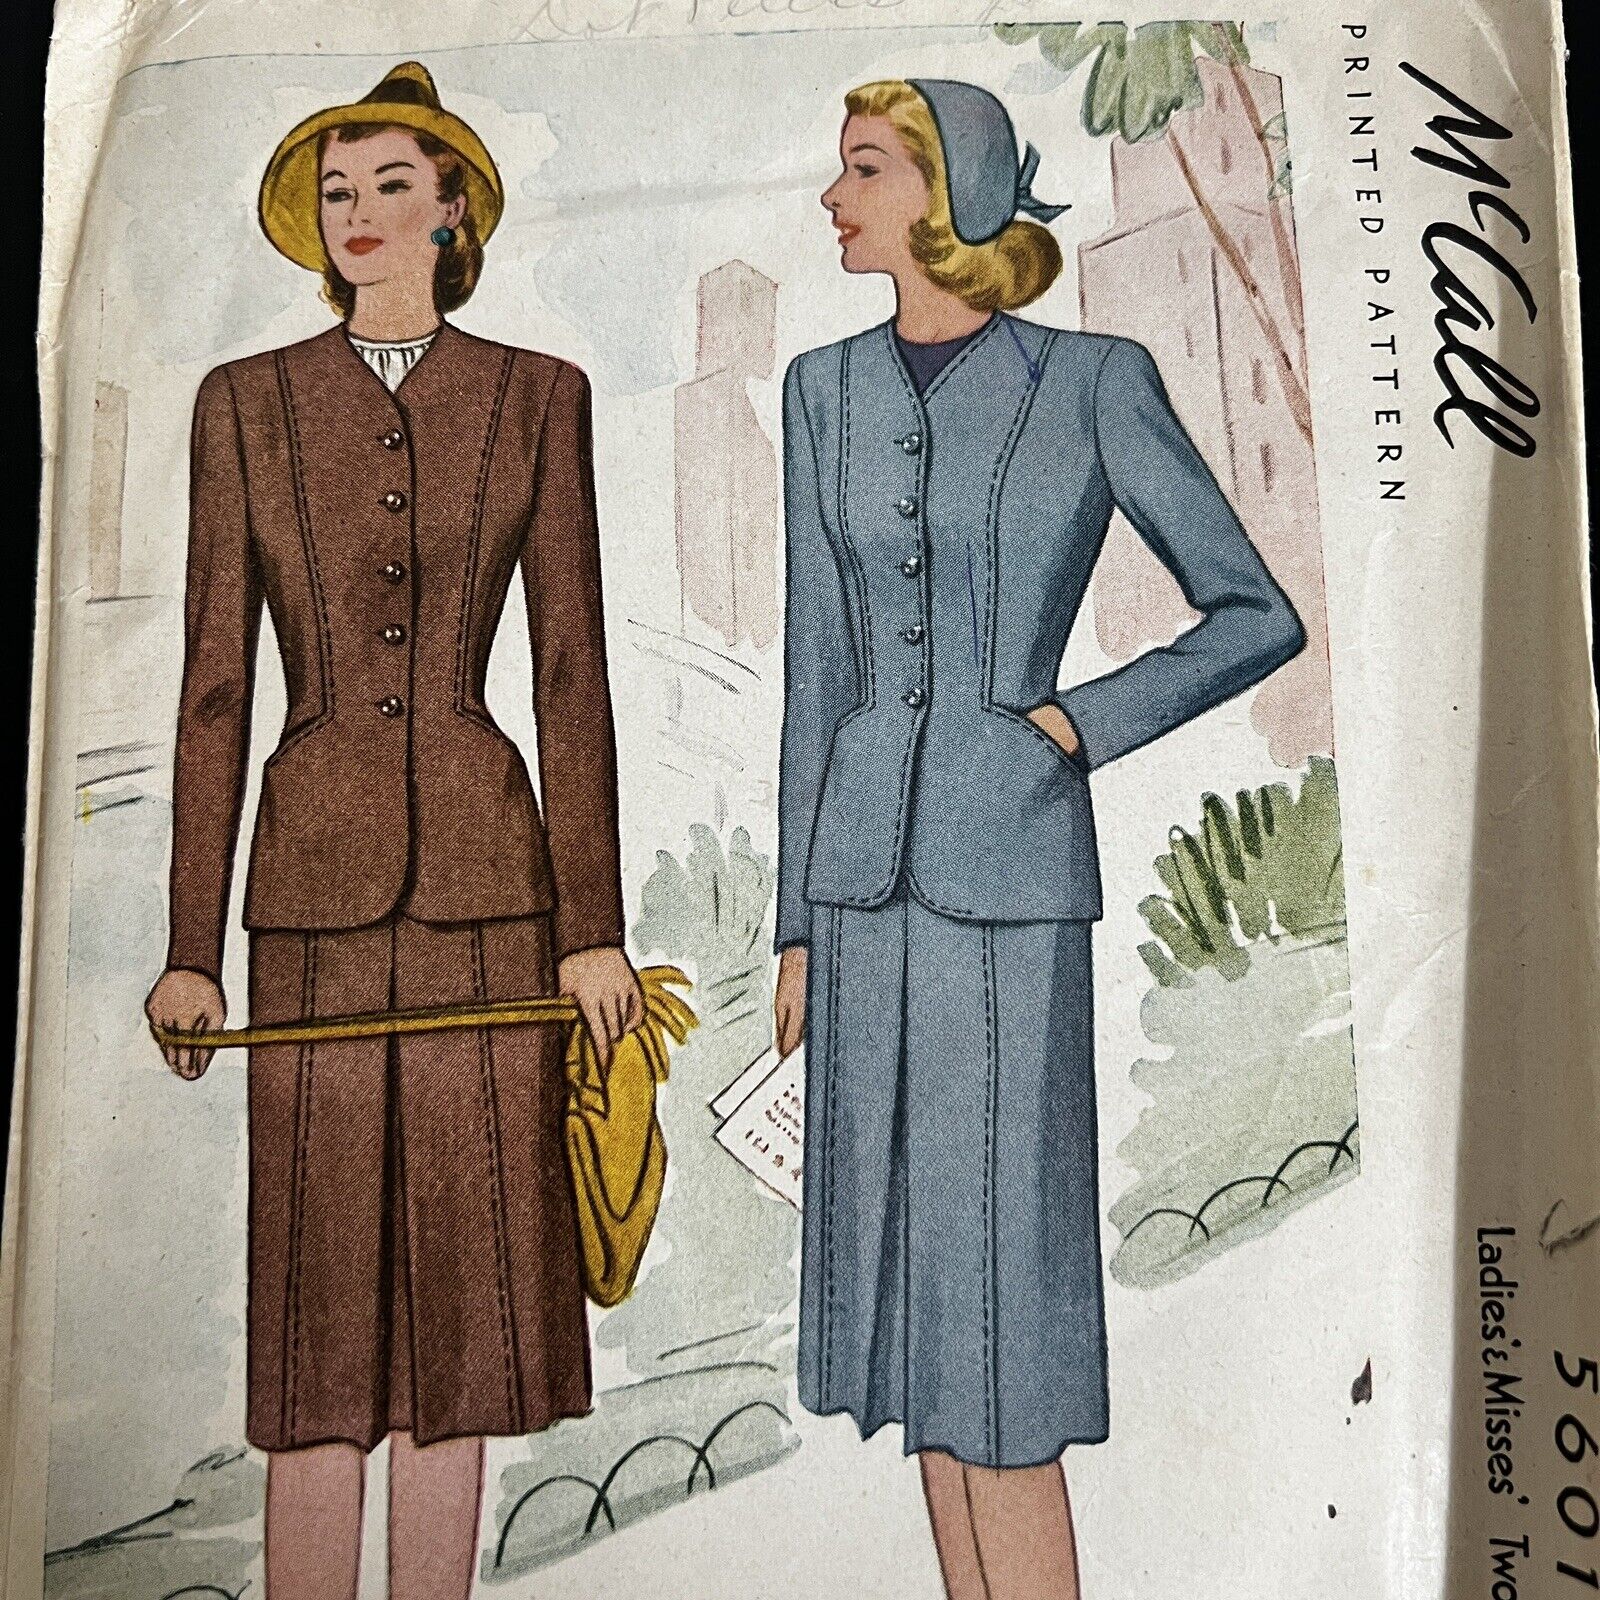 Vintage 1940s McCalls 5601 Tailored Inverted Pleat Skirt Suit Sewing Pattern 14